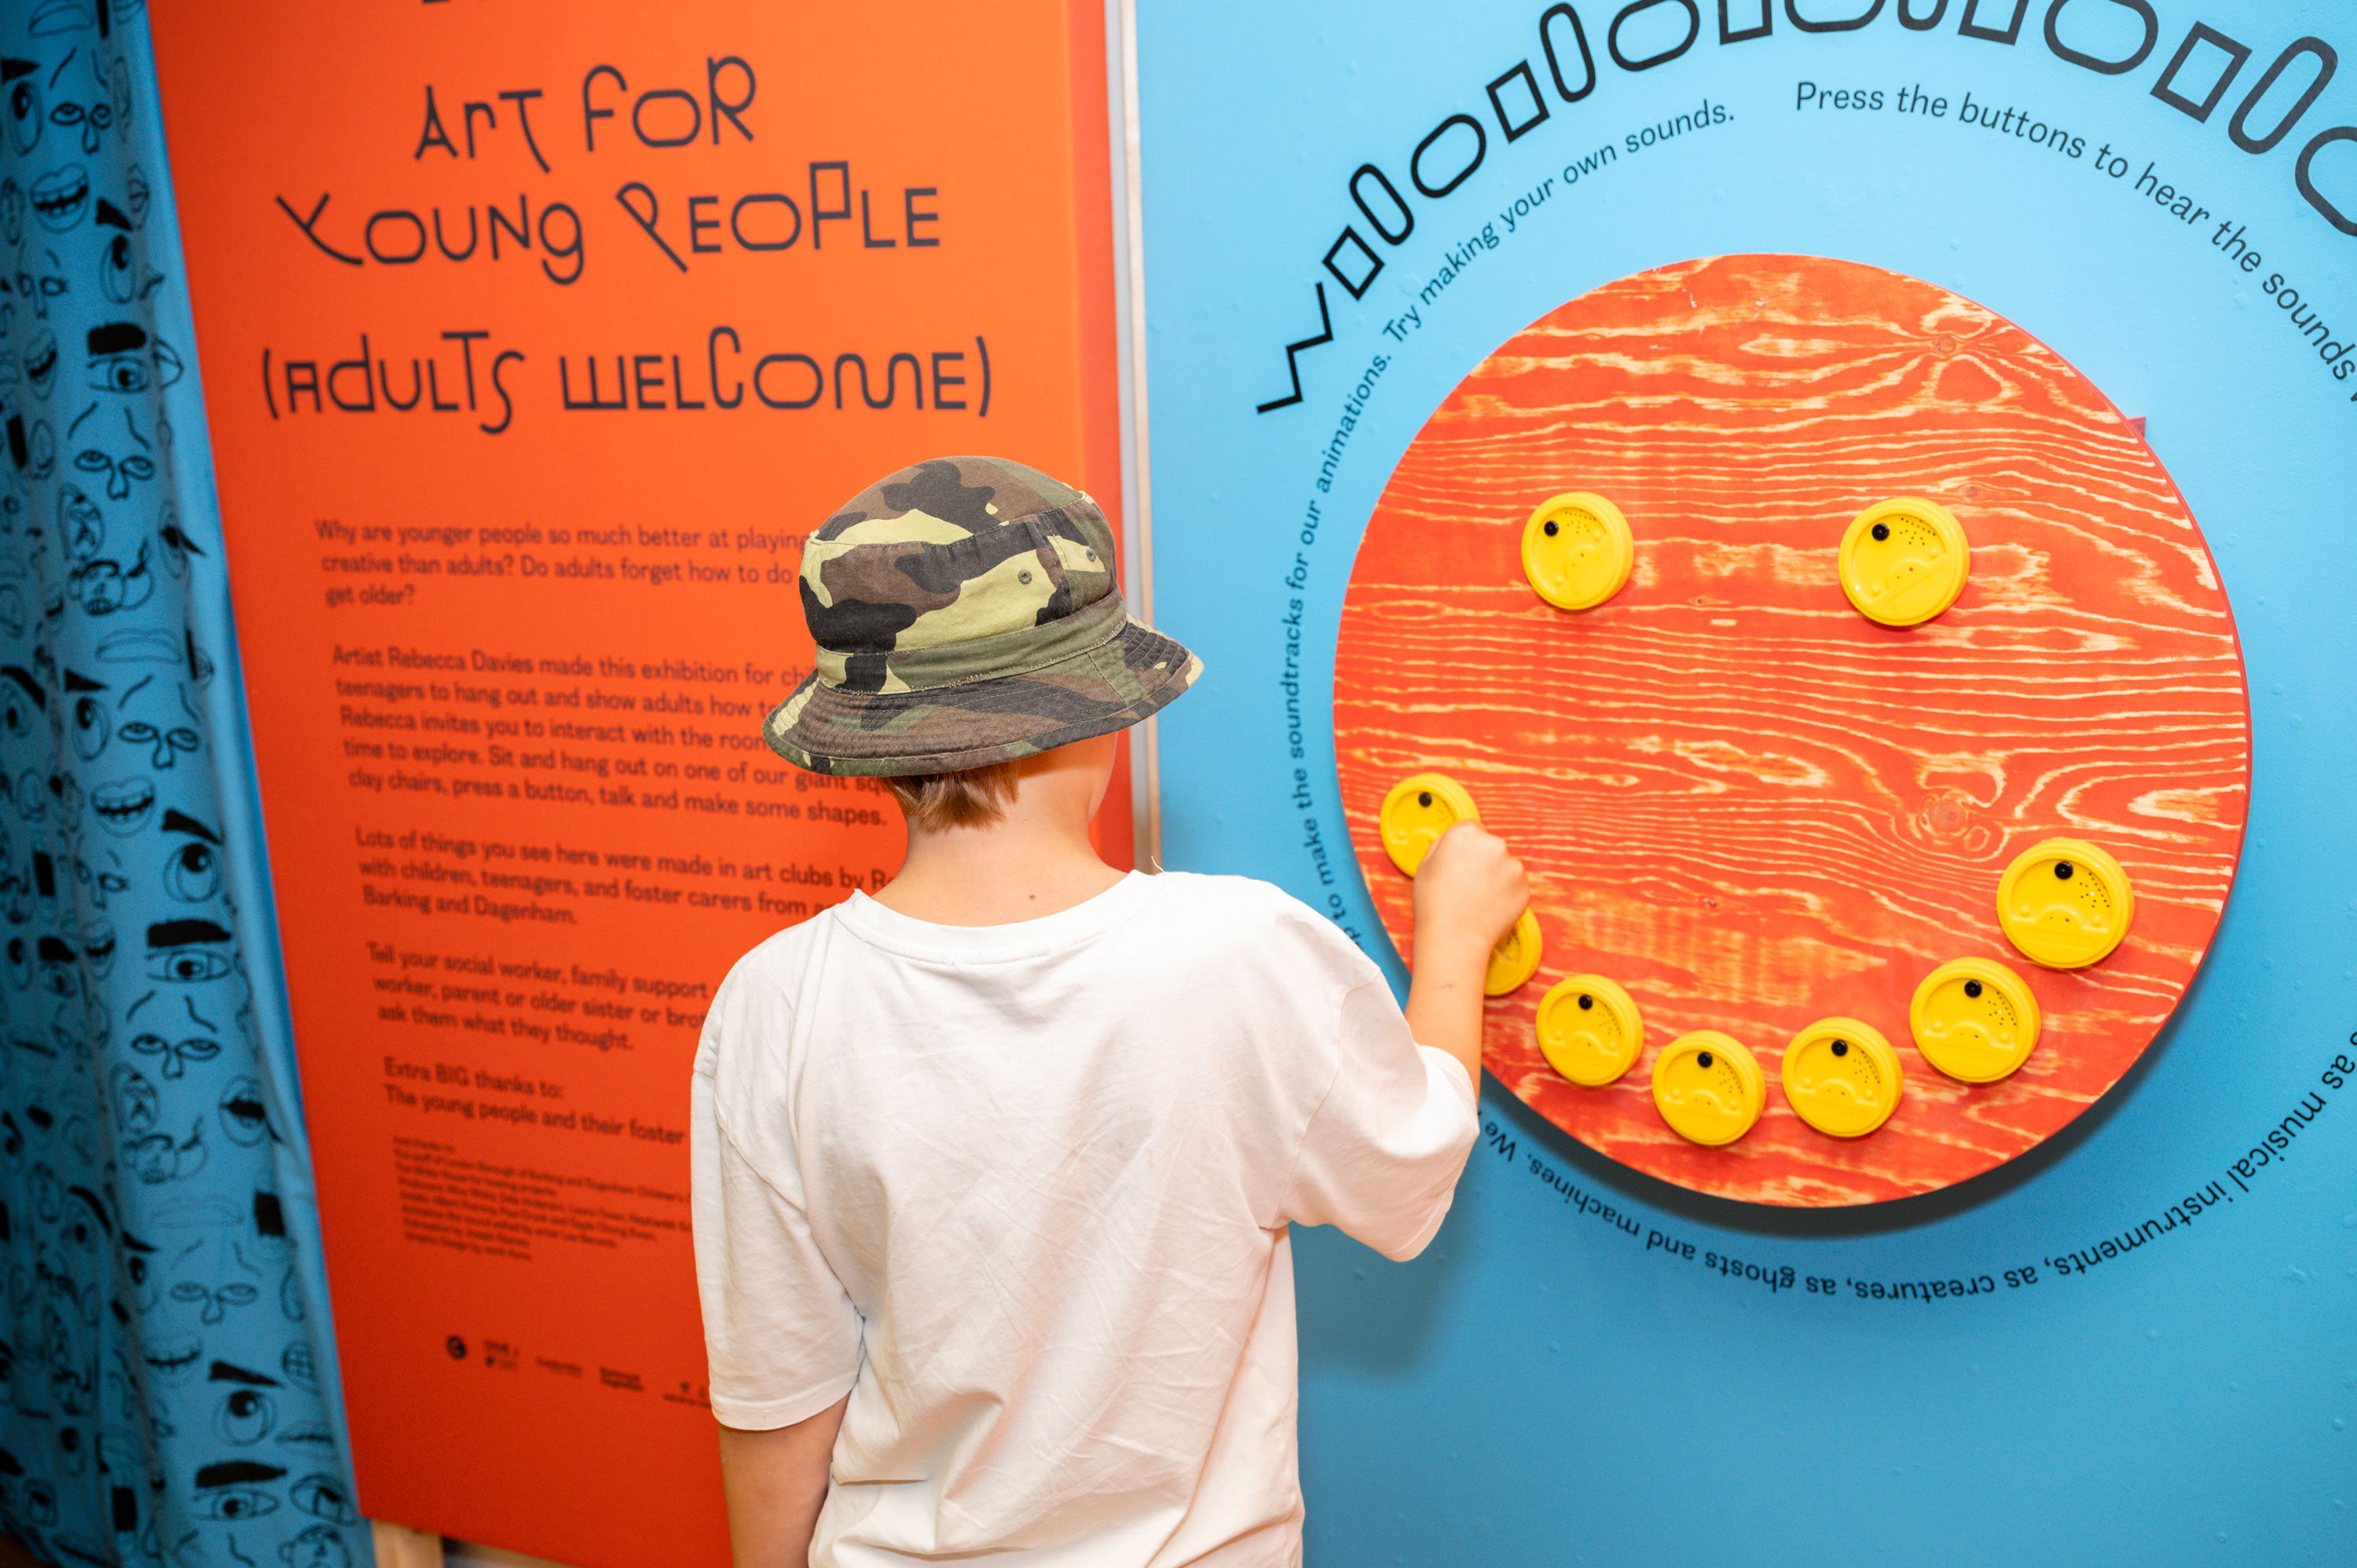 A young boy playing with a yellow button displayed on a big red circle placed on a blue wall